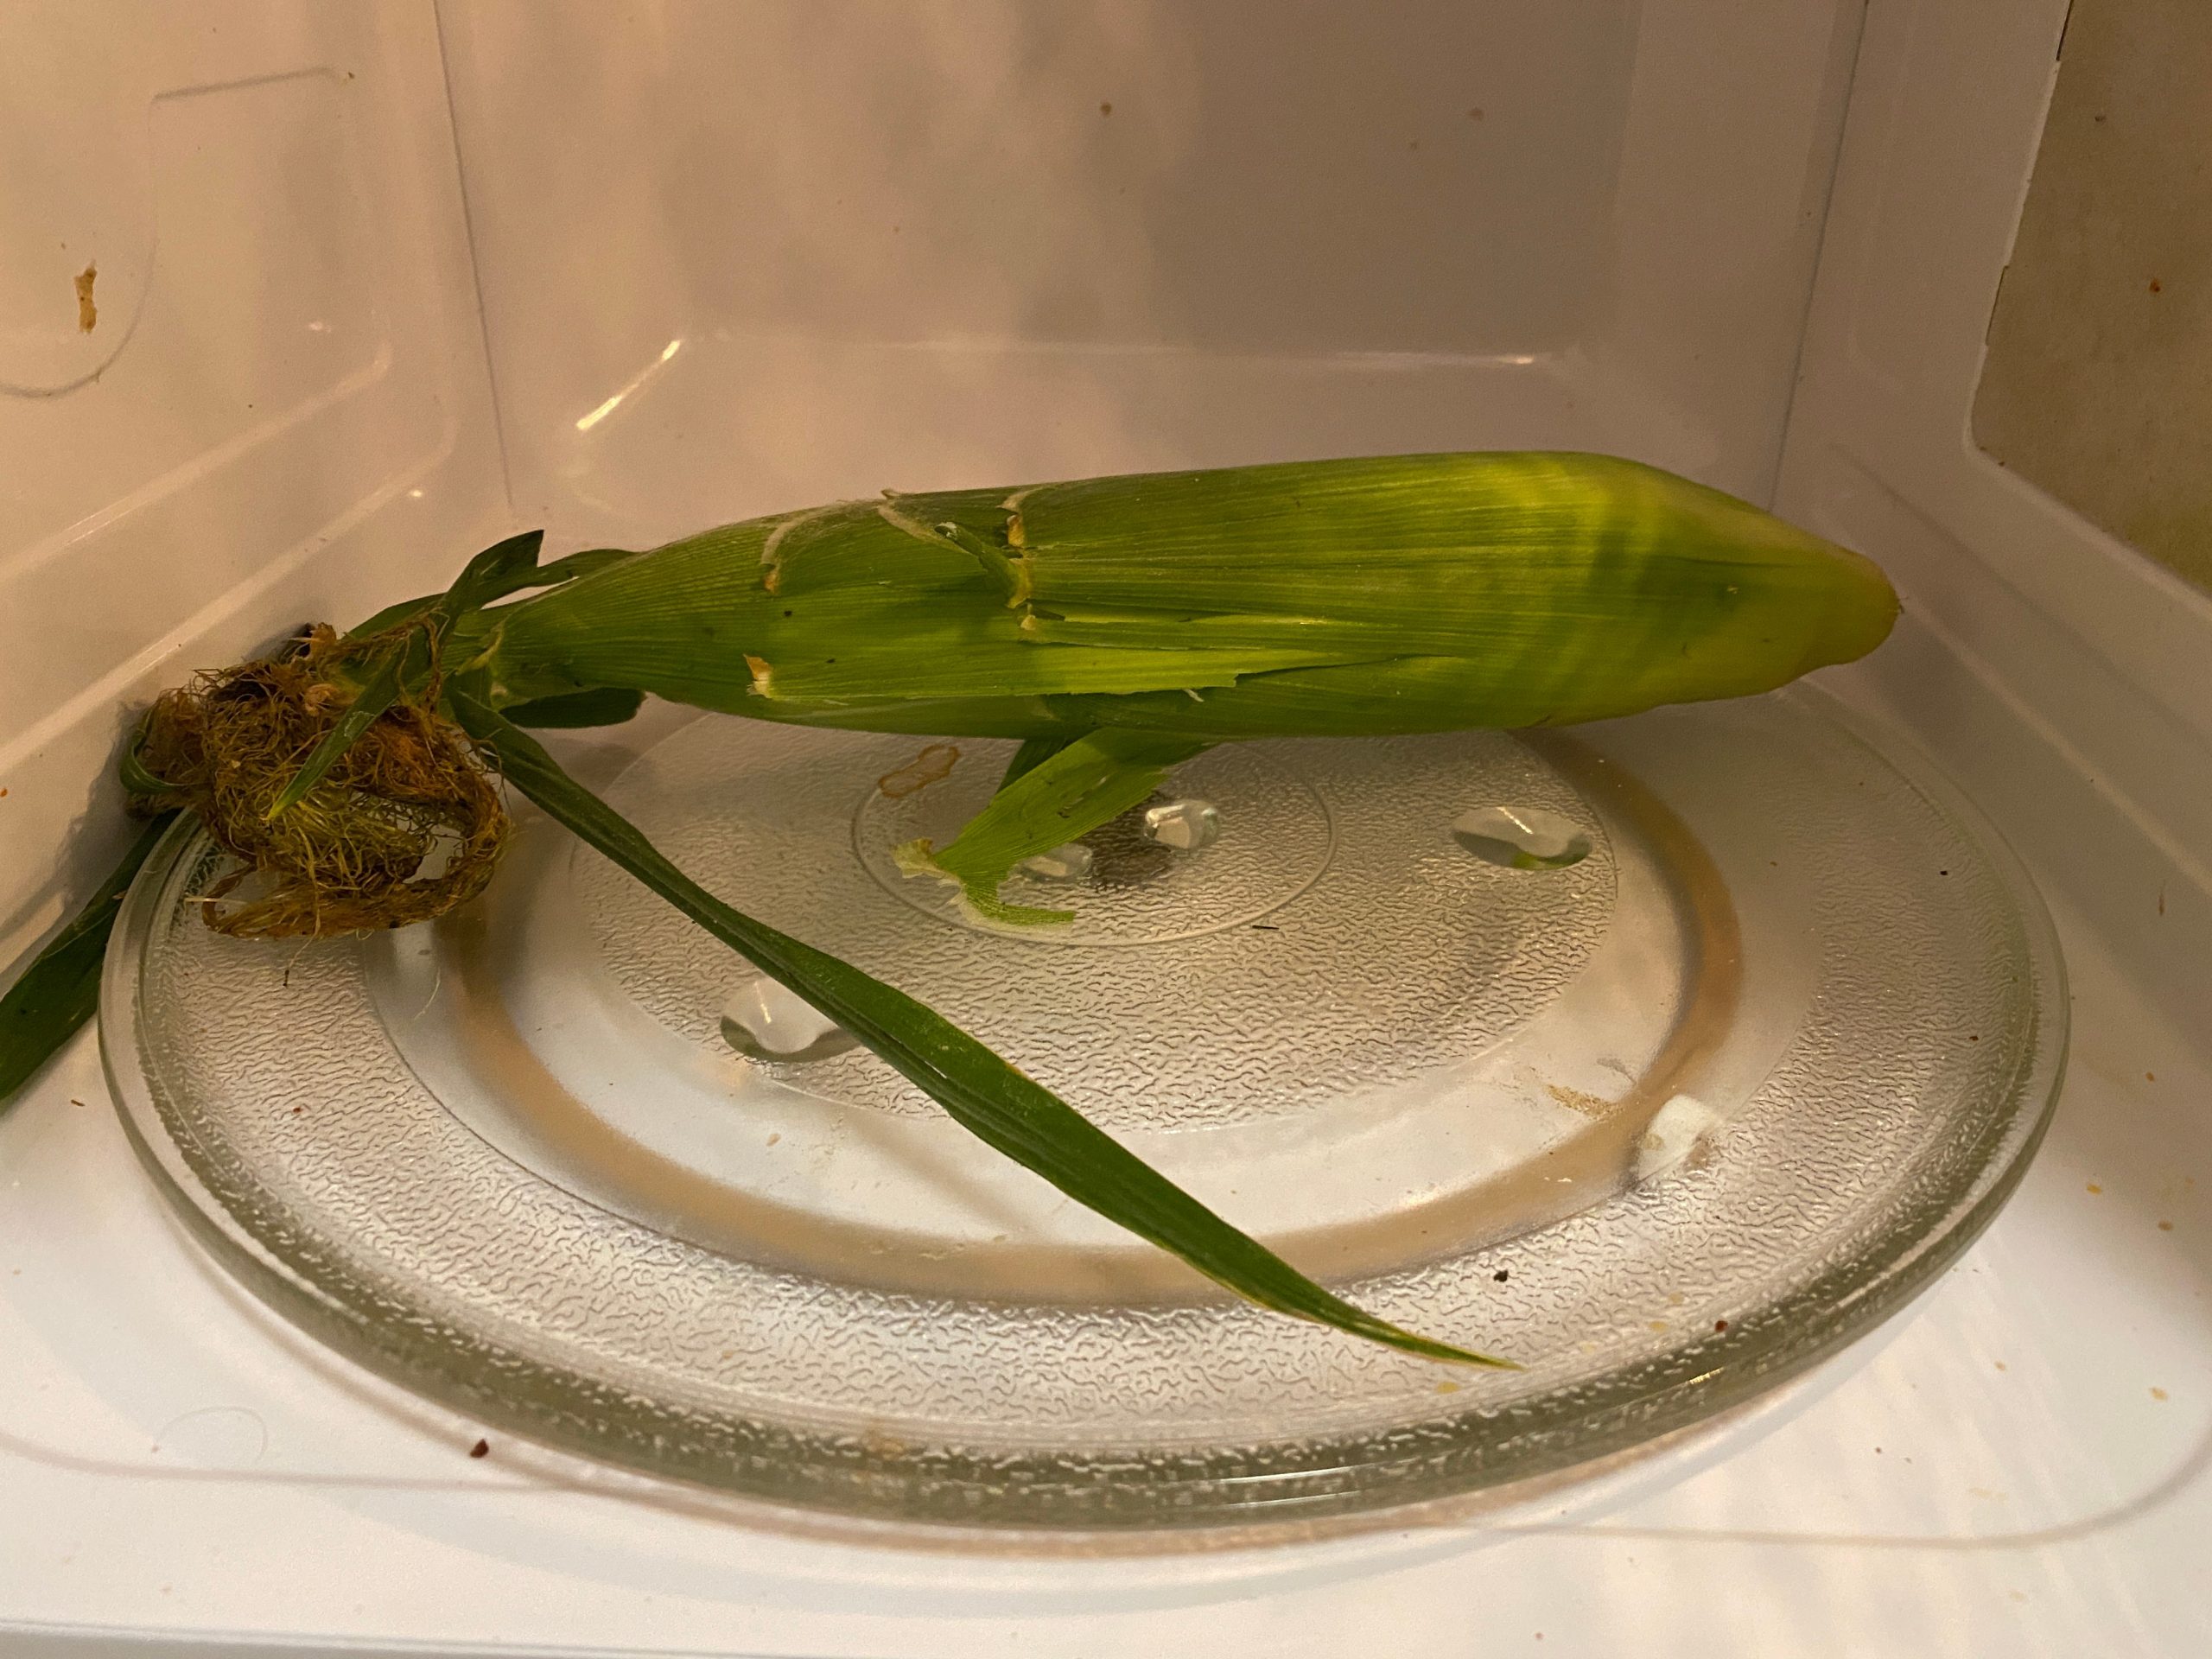 A corn in its husk in the microwave.